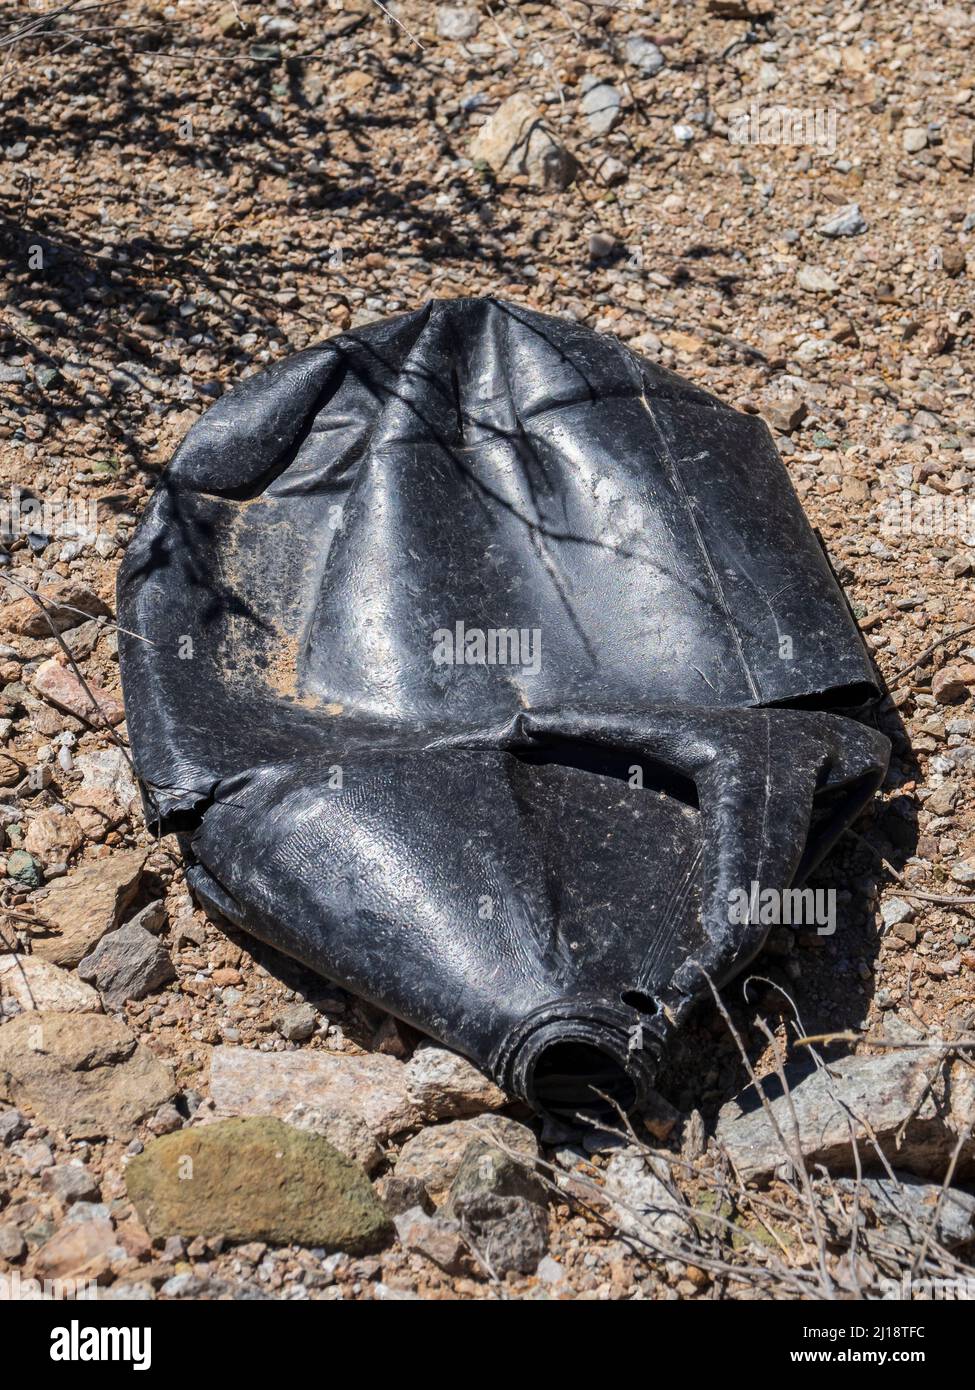 Non-reflective black water jug used by smuggler or illegal immigrant, Milton Mine Trail, Organ Pipe Cactus National Monument, Arizona. Stock Photo